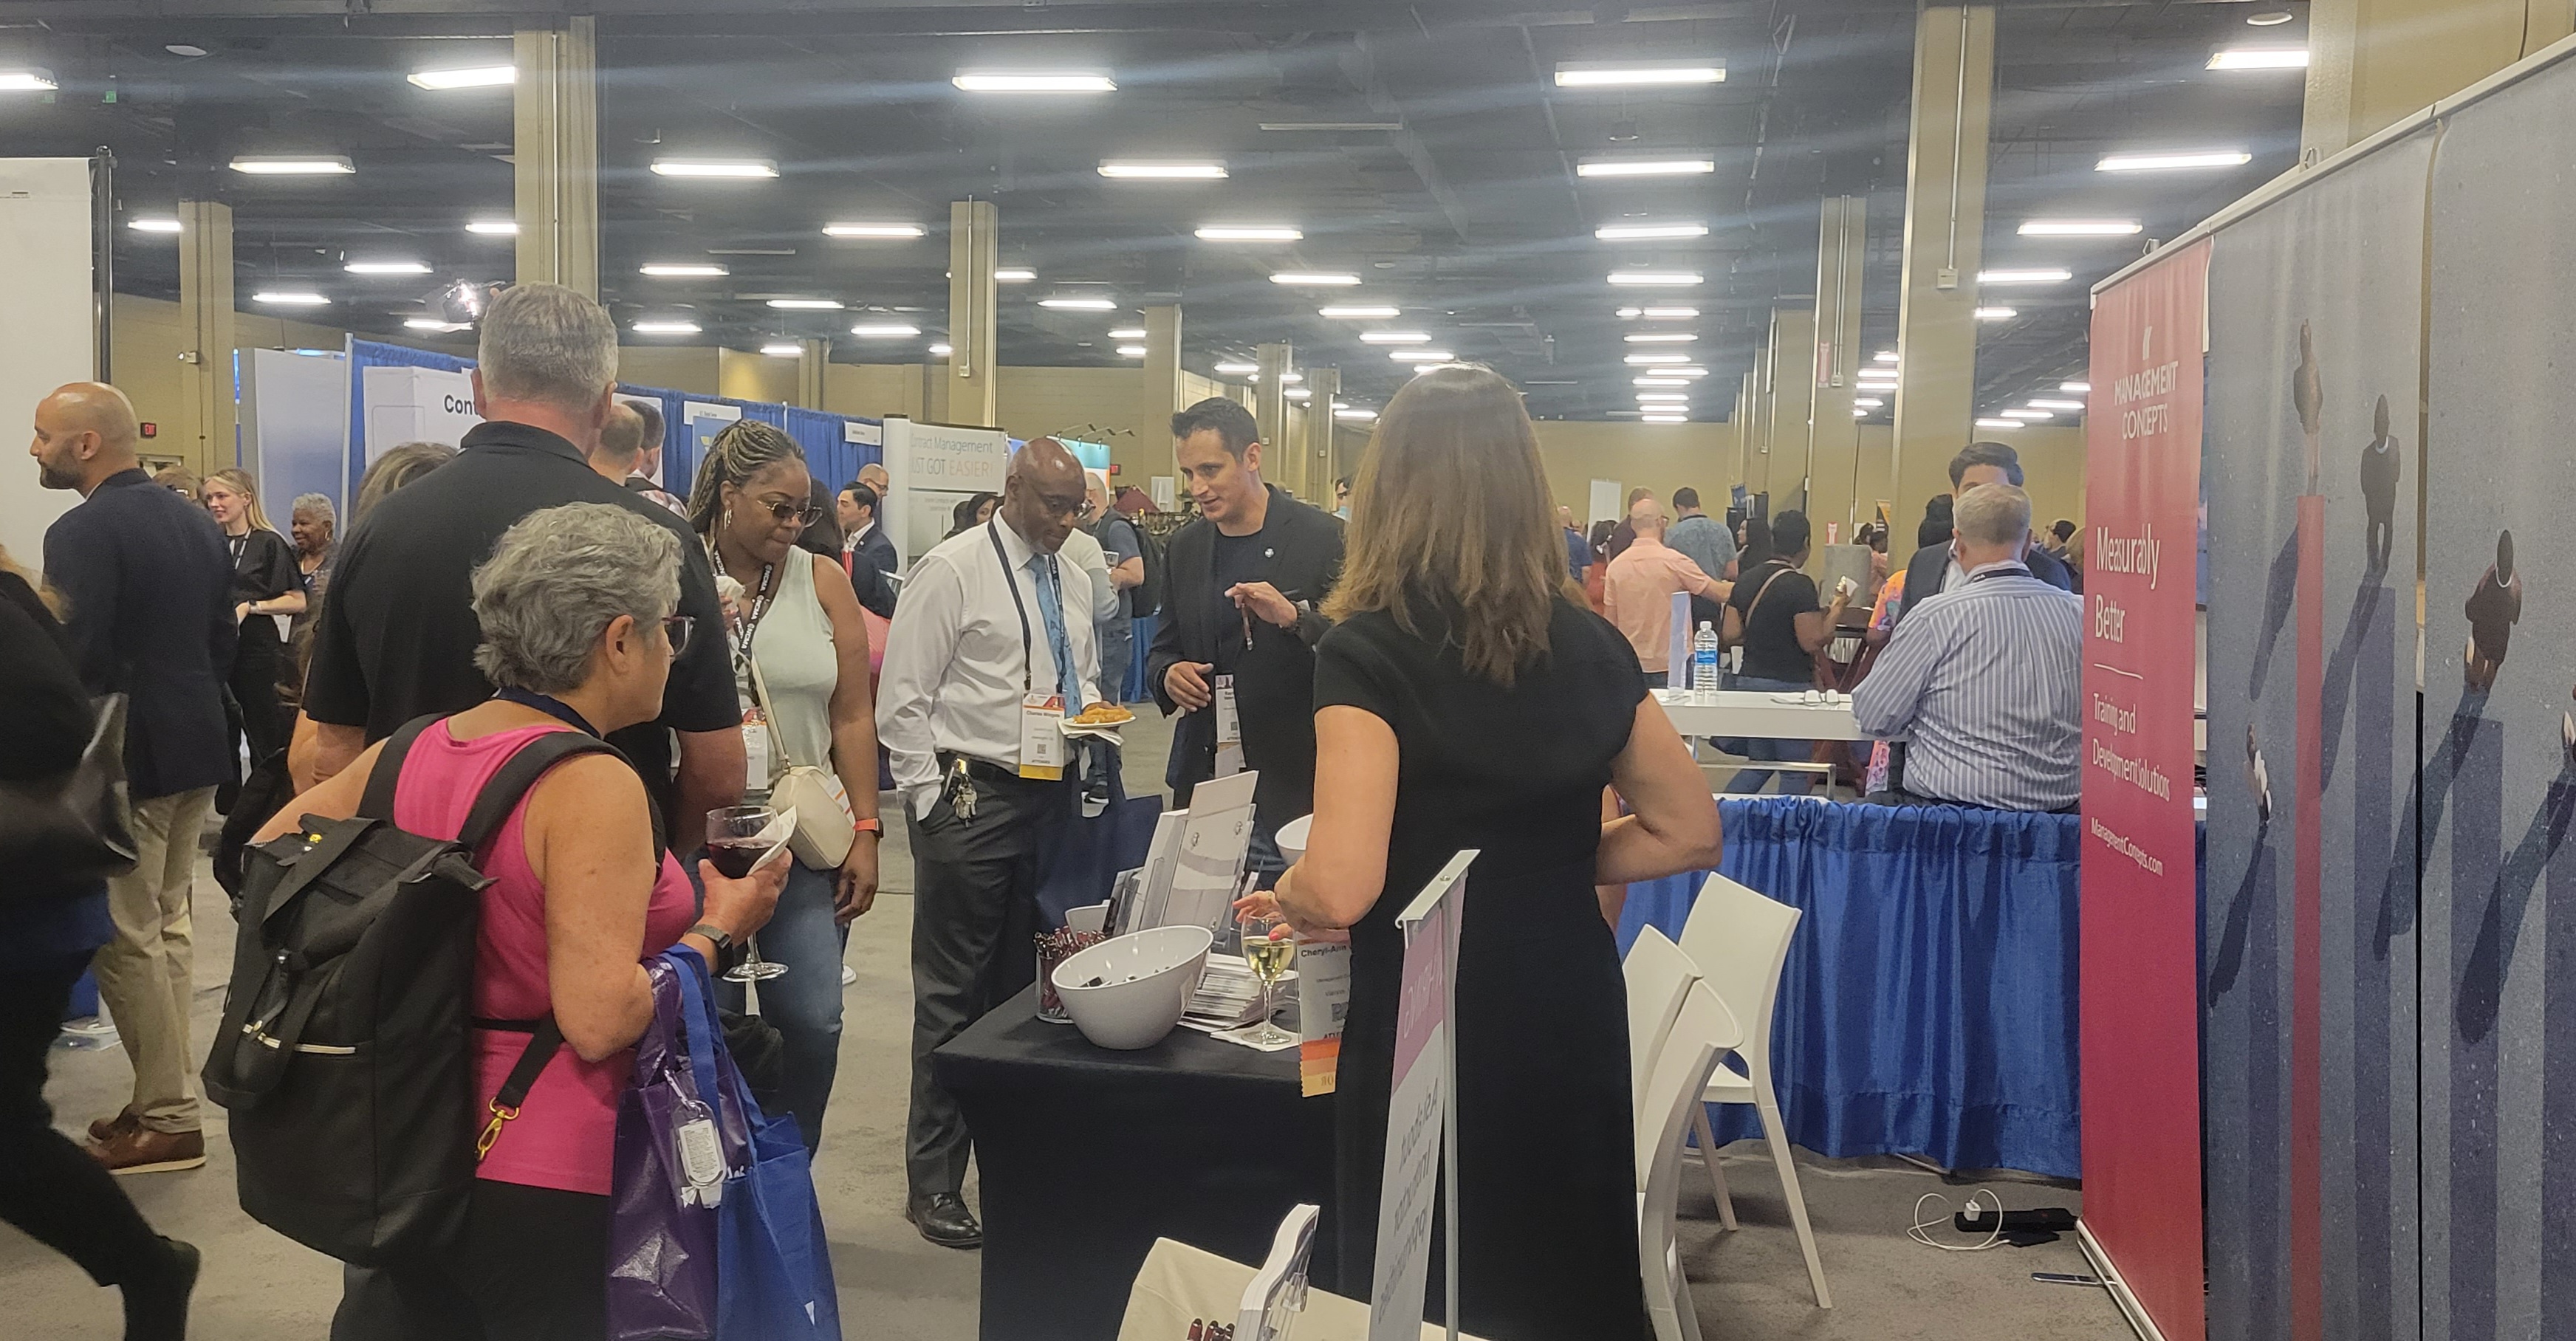 A crowd of people talking and visiting vendor booths in exhibit hall